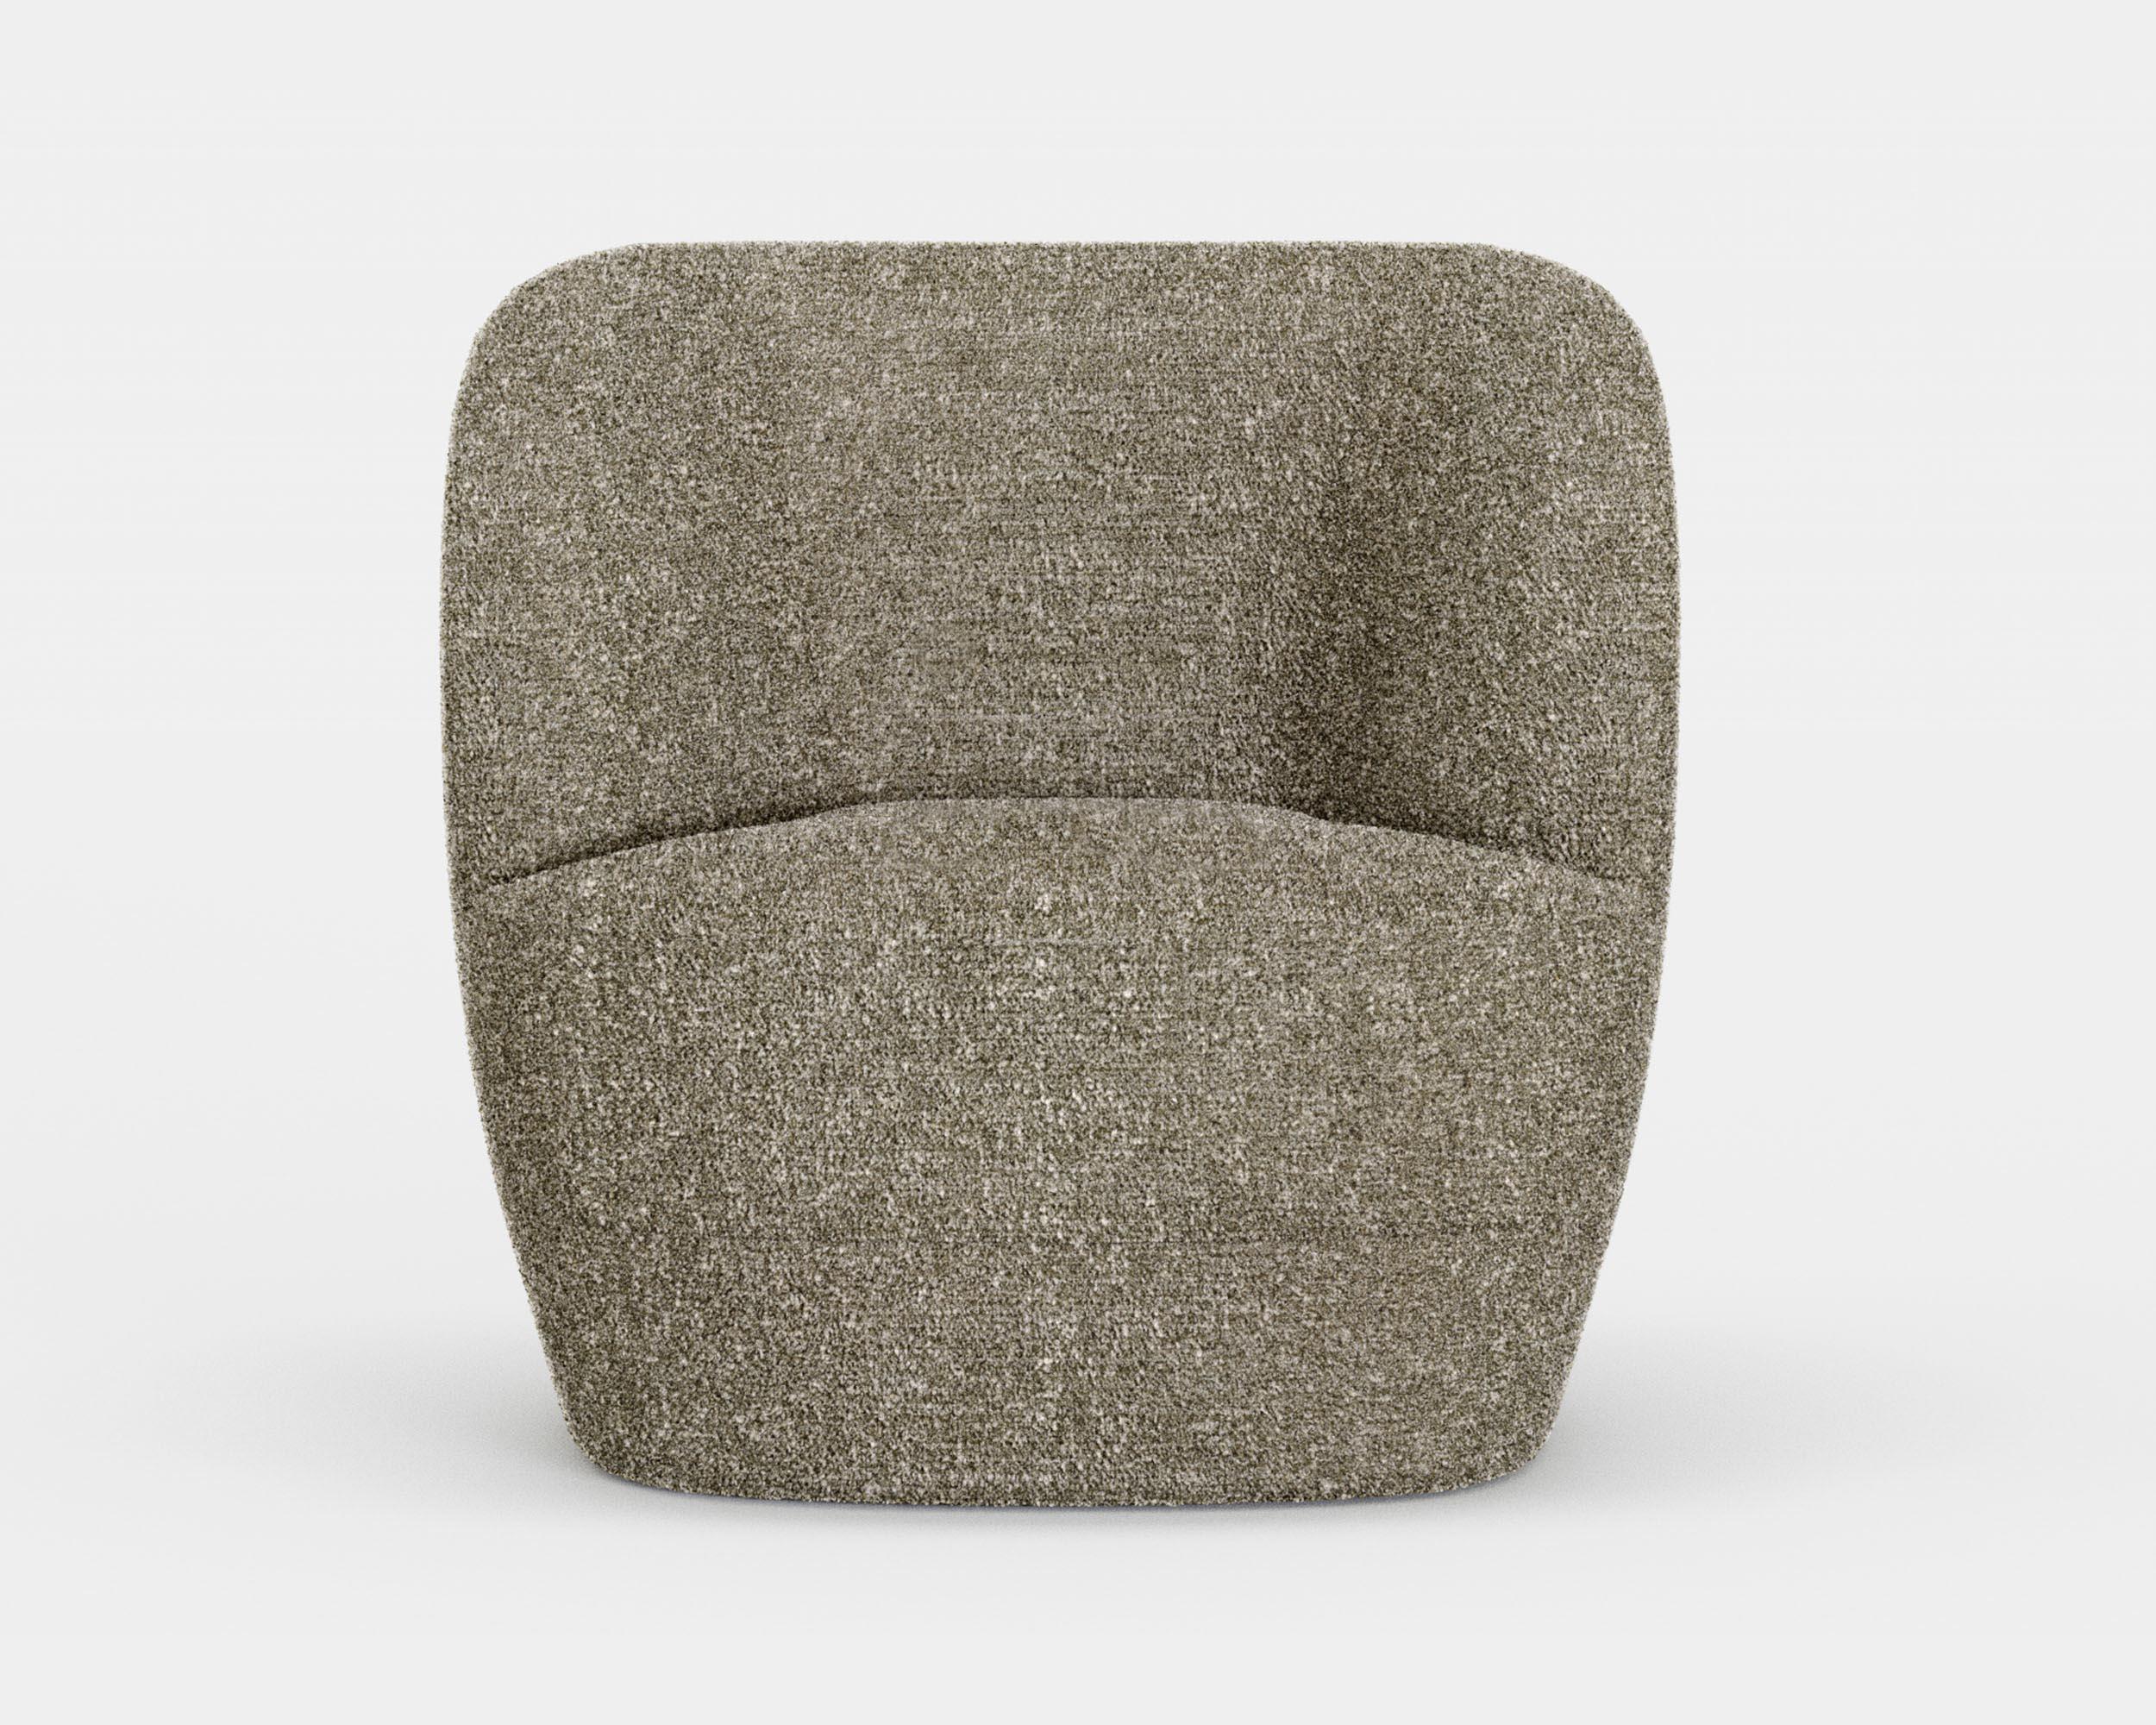 'Lombard Street' Armchair by Man of Parts
Signed by Yabu Pushelberg

Dimensions:
- H. 77 x W. 76 x D. 79 cm  / Seat 41 cm 

Model shown: Sahco, Zero, col.0012
A wide range of fabrics is available 

__________________

The Lombard Street armchair was